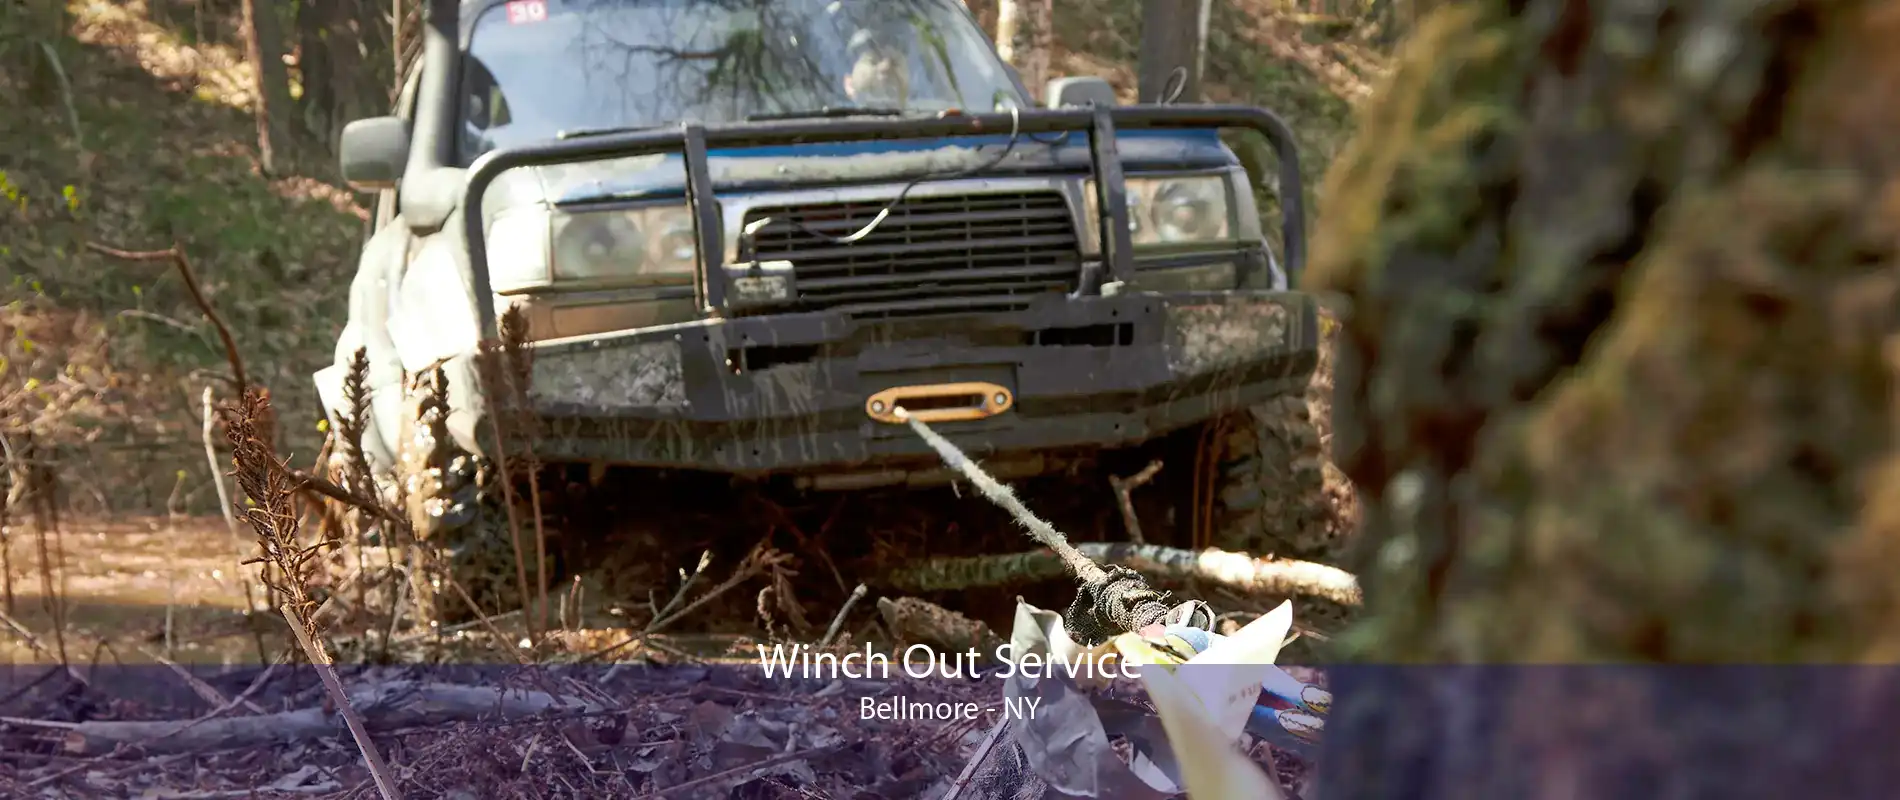 Winch Out Service Bellmore - NY